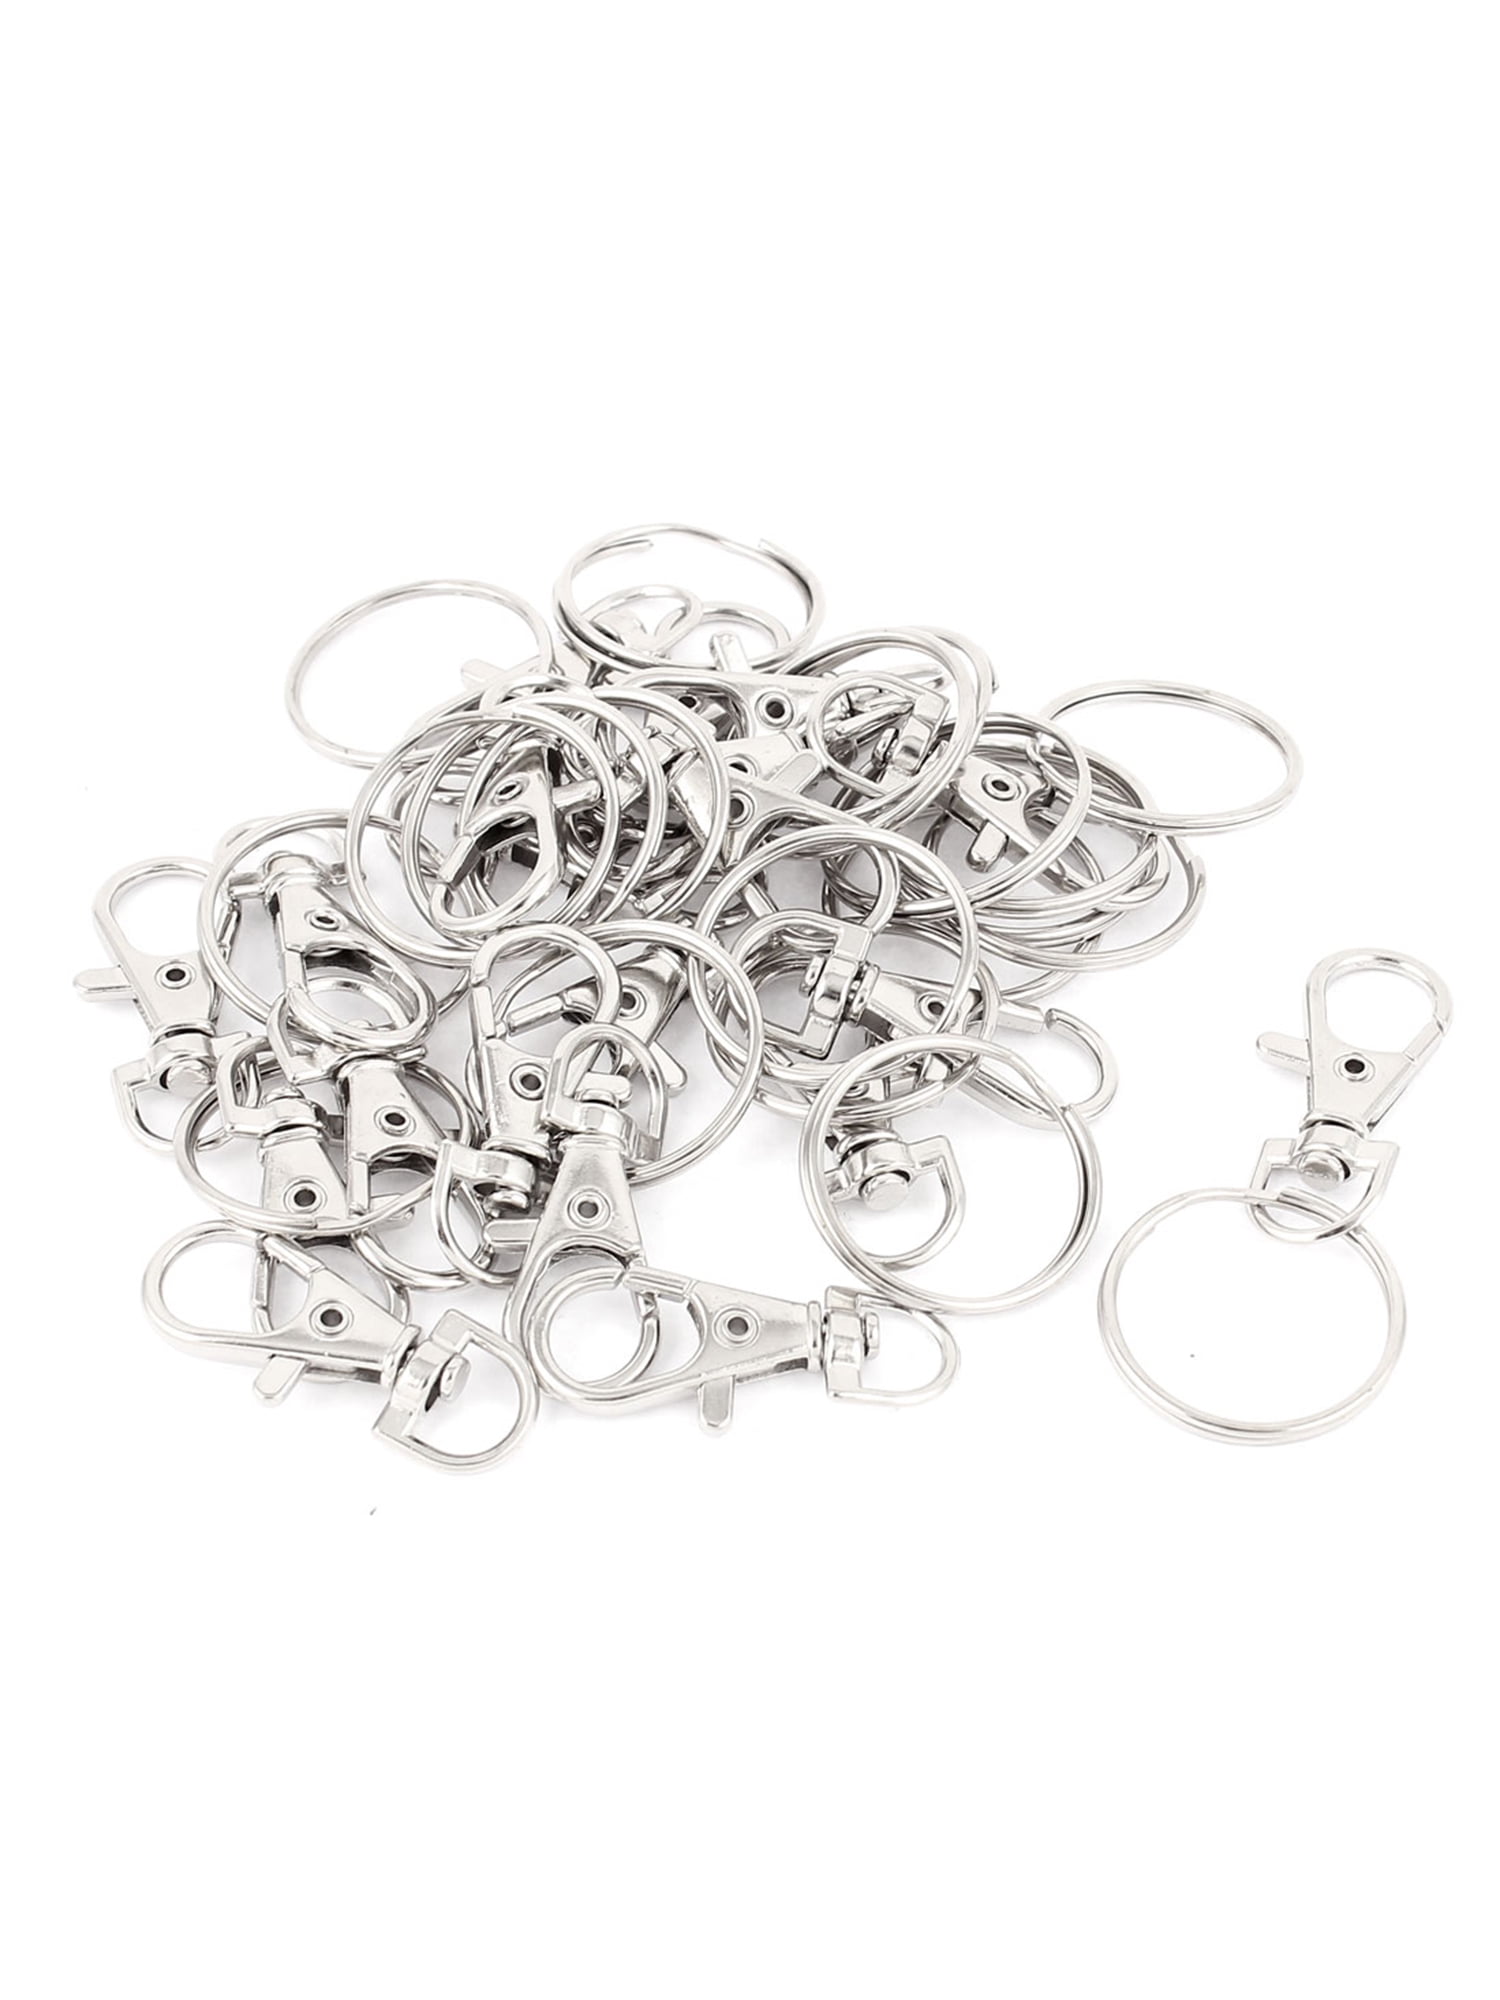 Wholesale Lot of 40 Silver Tone Ball Chains for DIY Keychains 4 inch 